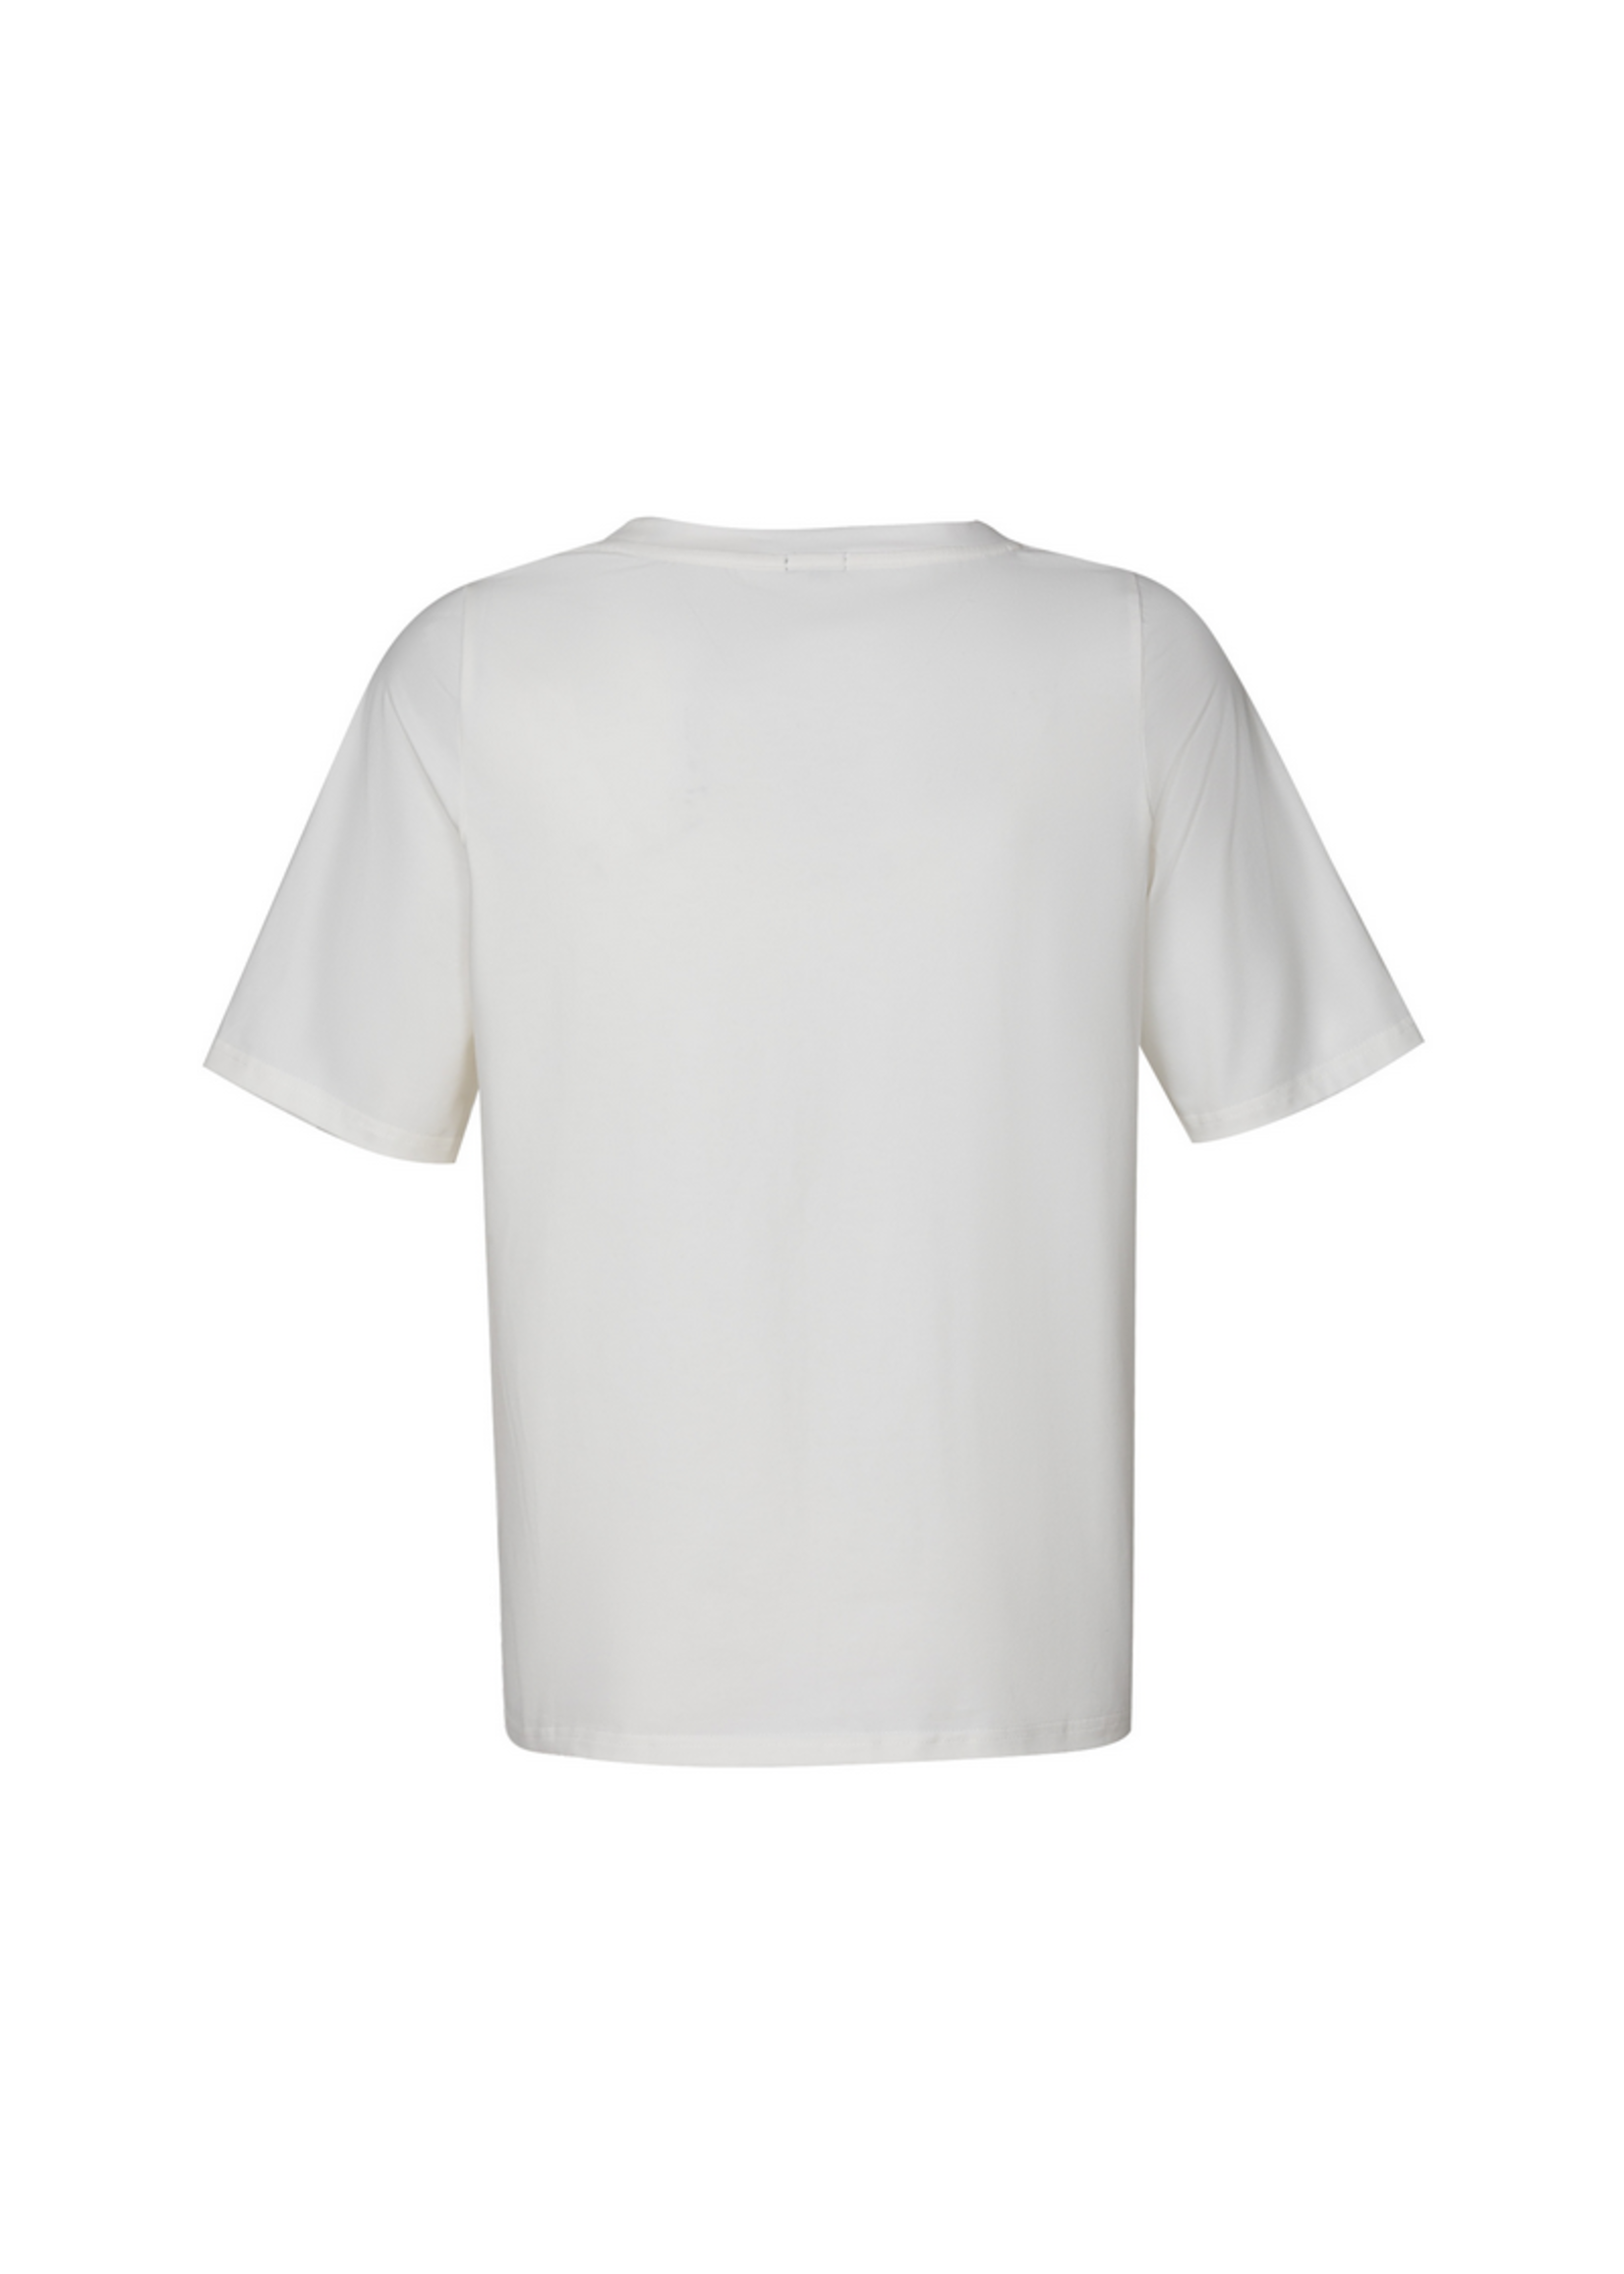 Excellent Fay T-shirt Offwhite/Saffierblauw